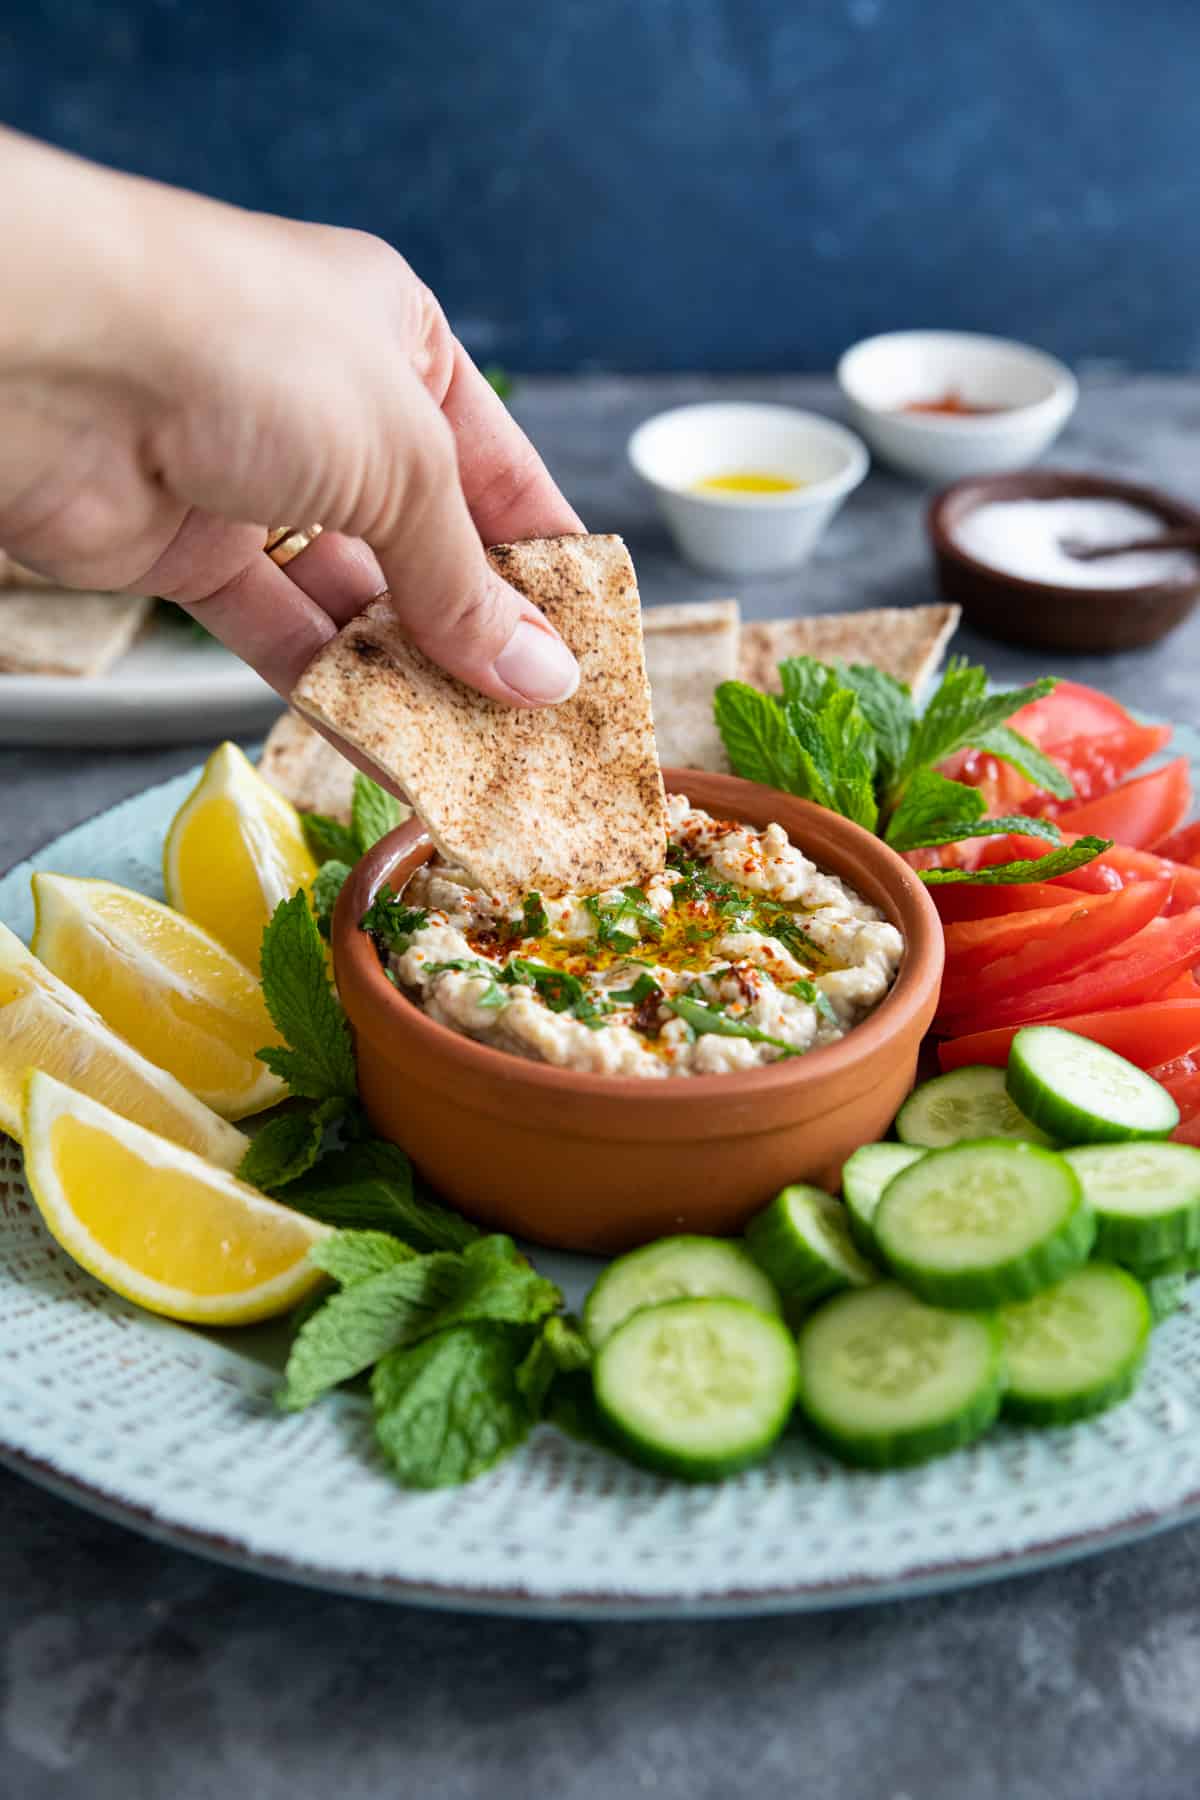 Mutabal is a Middle Eastern eggplant dip with a nice smoky flavor. It's different from baba ganoush and can be served with fresh pita bread as an appetizer or on a mezze platter for a tasty feast!